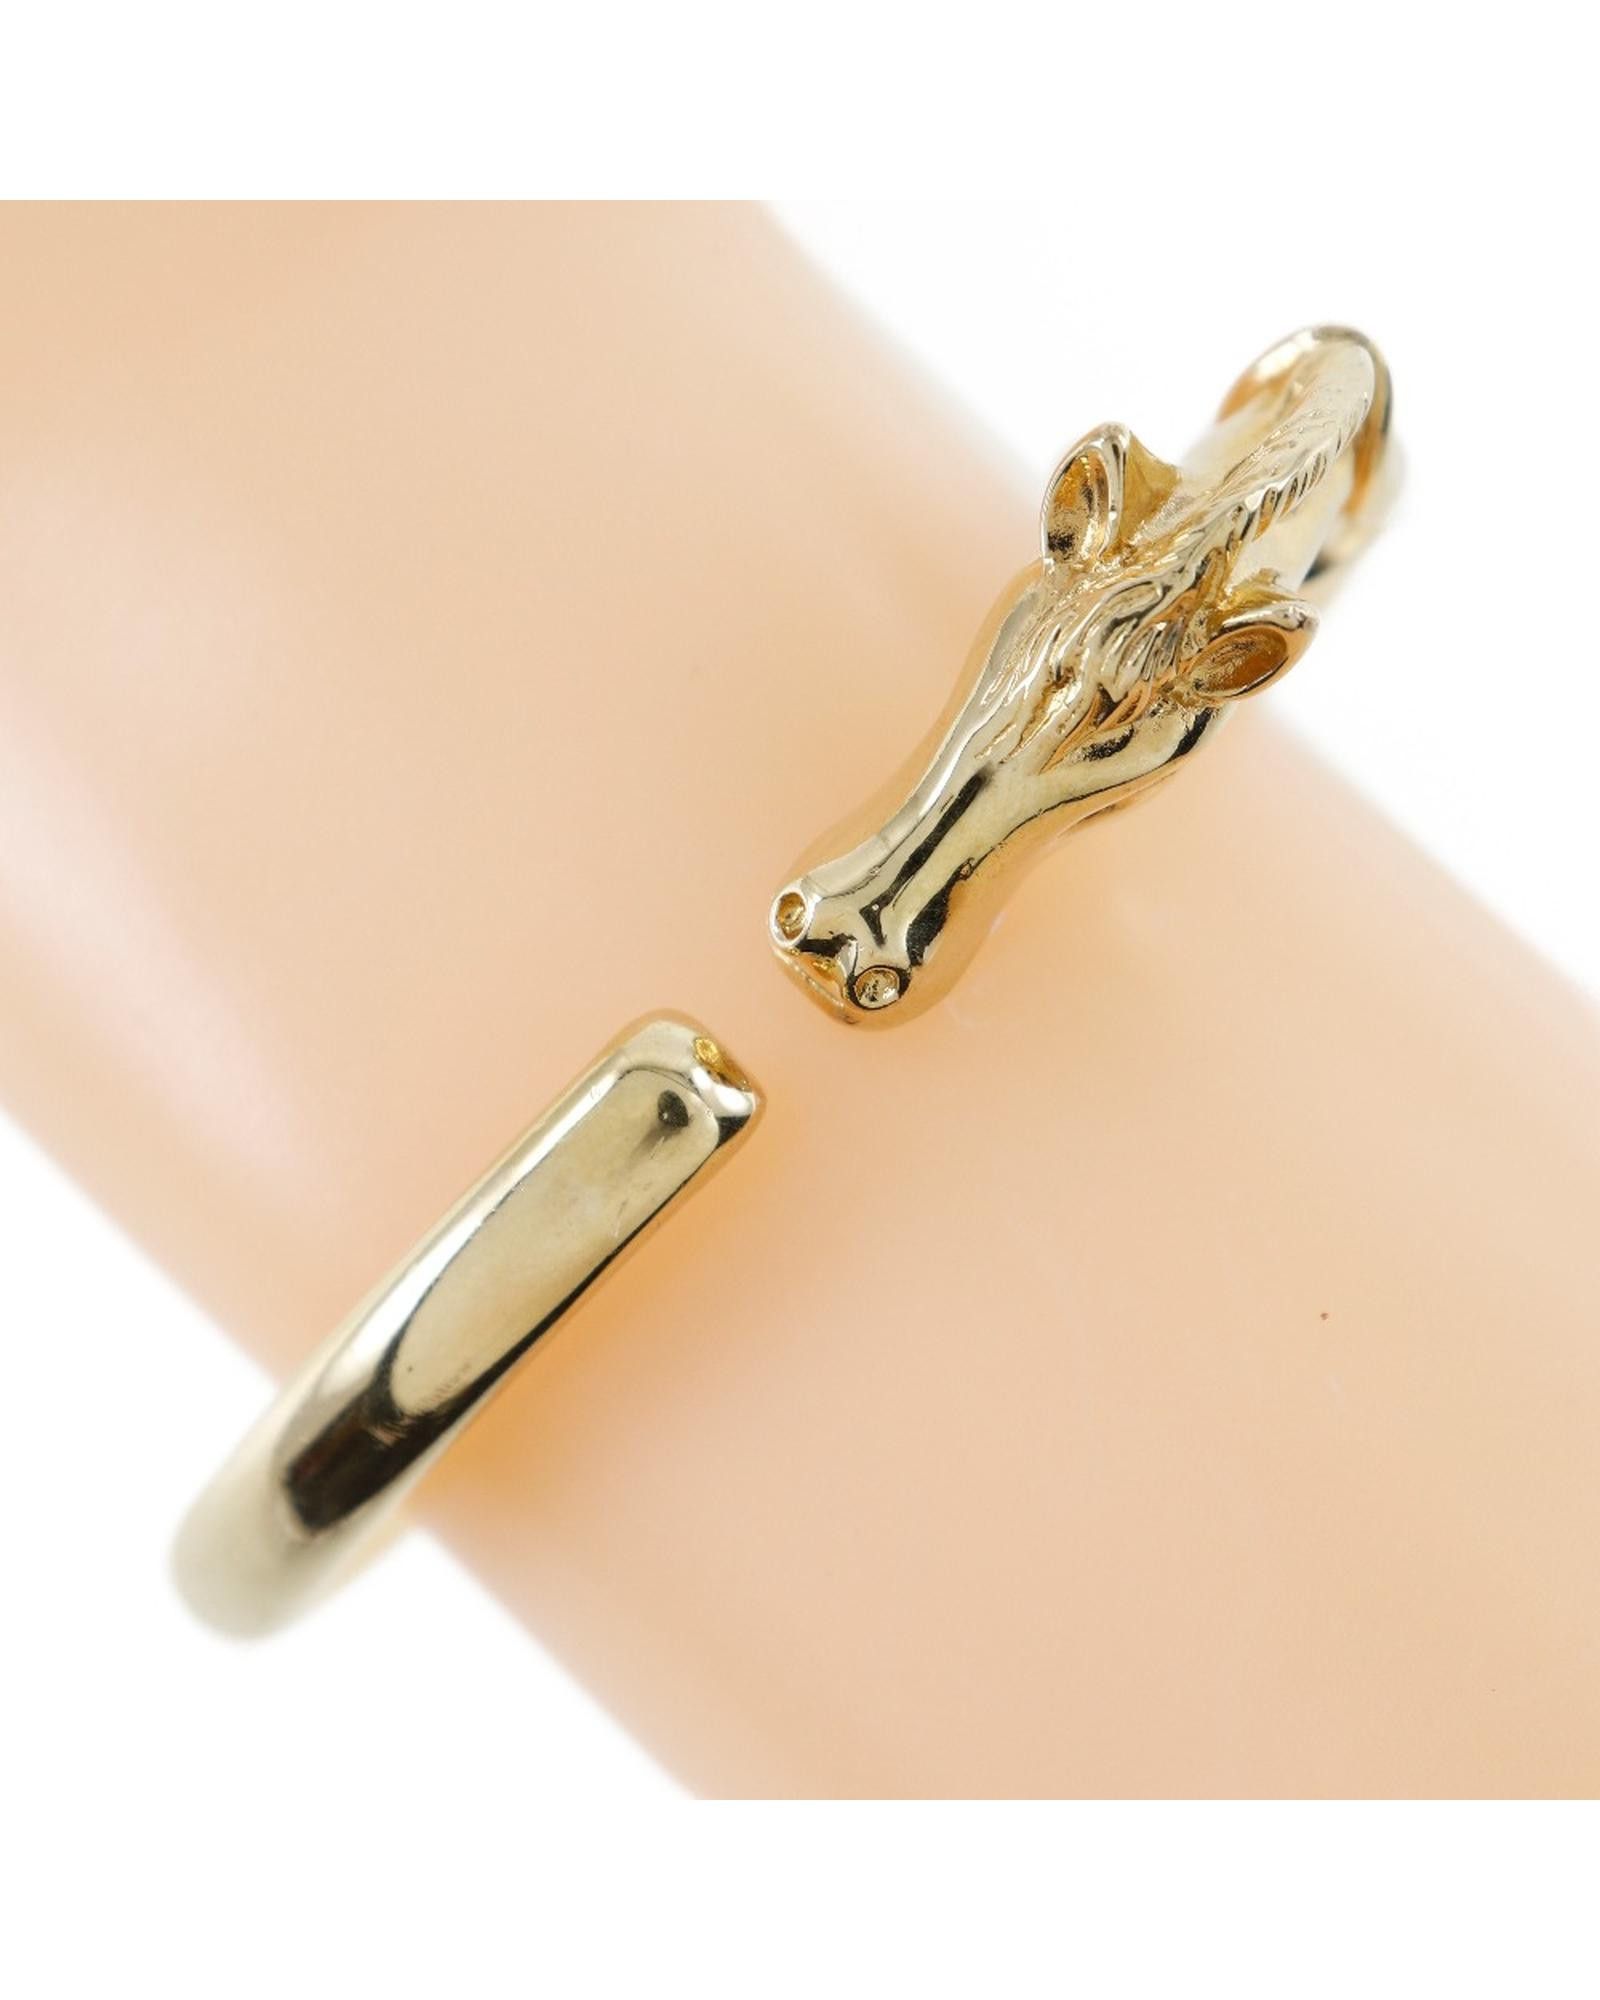 image of Hermes Golden Horse Bangle Jewelry In Ab Condition - 19-0.6 Inches, Women's